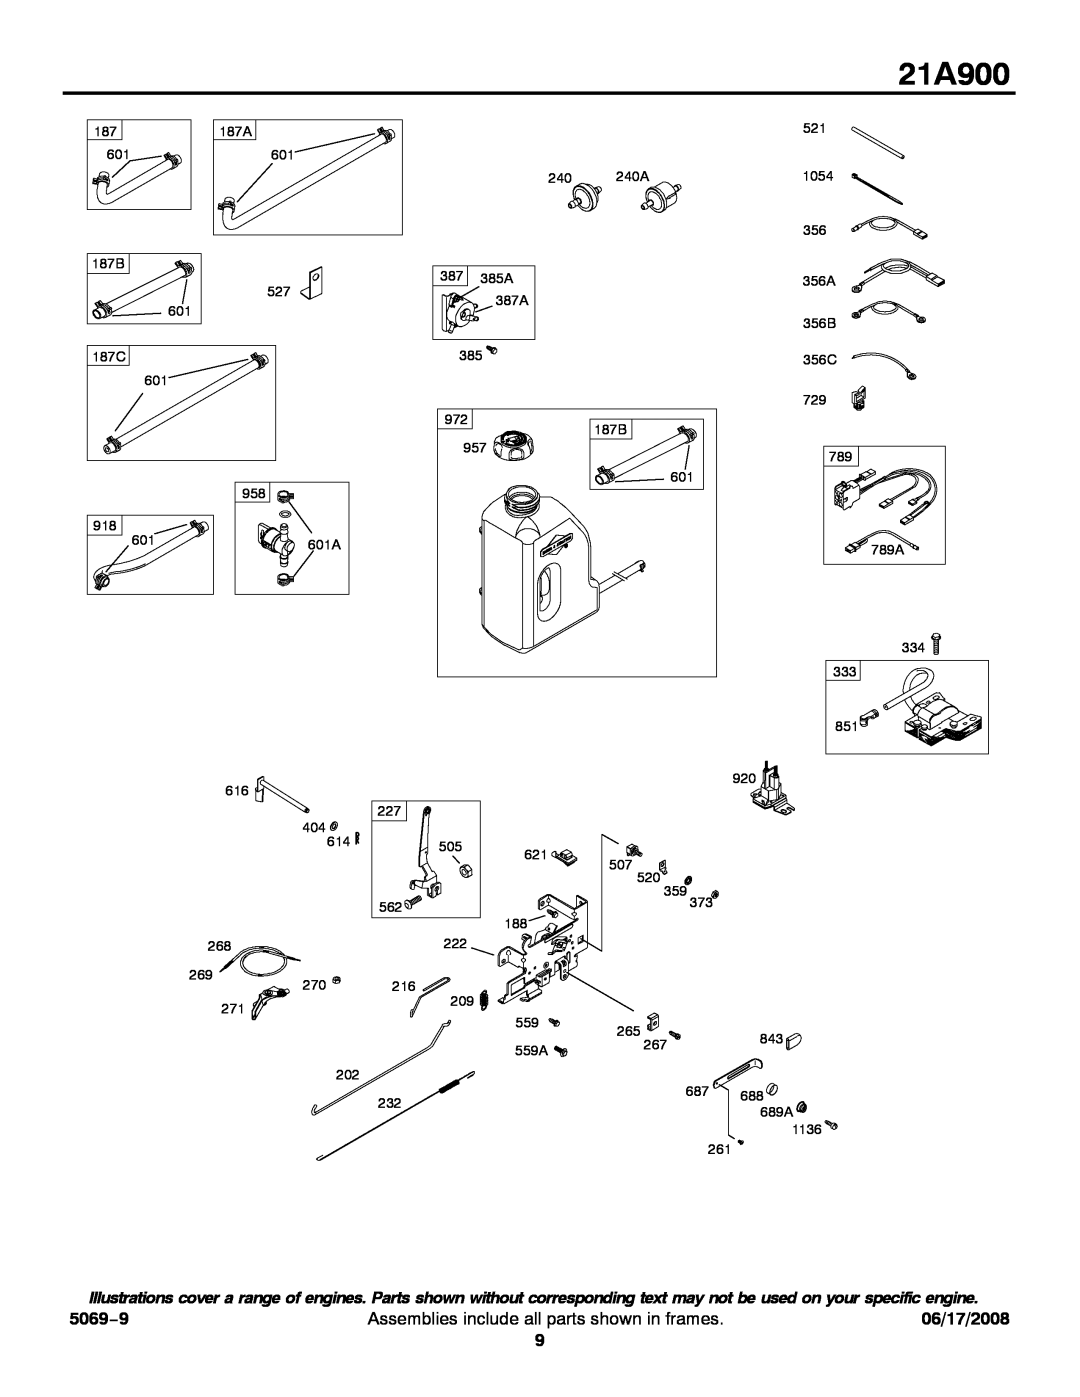 Briggs & Stratton 21A900 service manual 5069−9, Assemblies include all parts shown in frames, 06/17/2008 